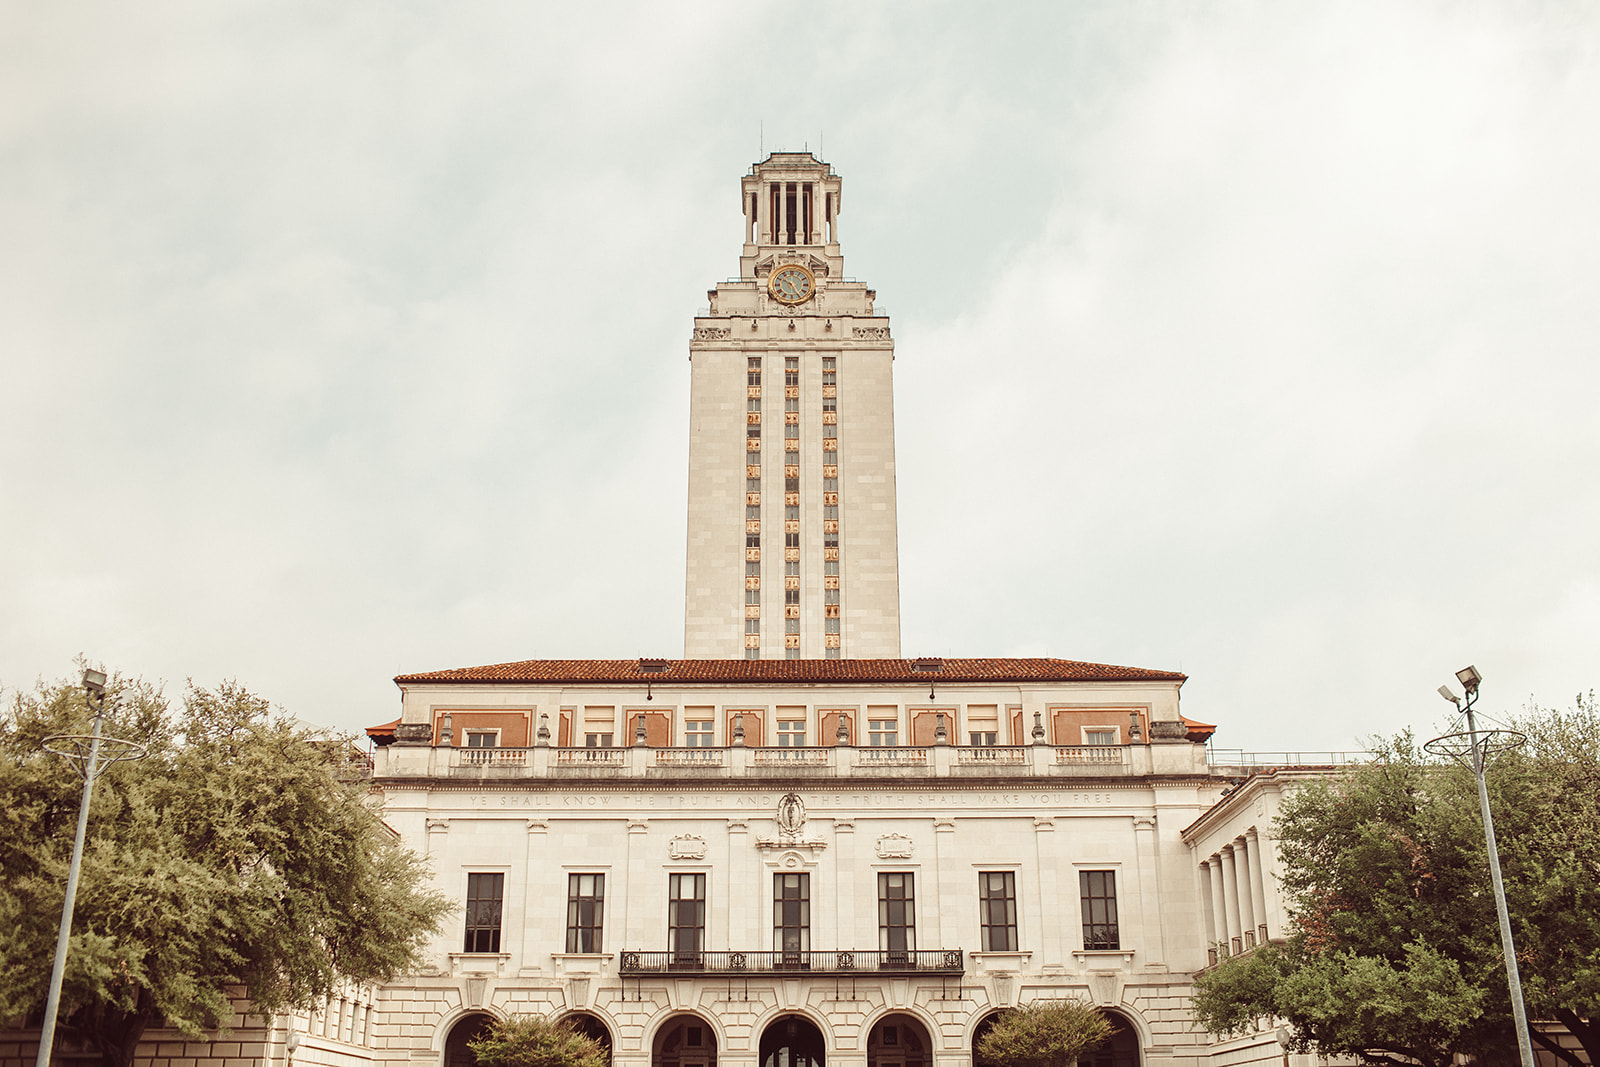 A North-facing view of the UT Austin Main Building and Tower